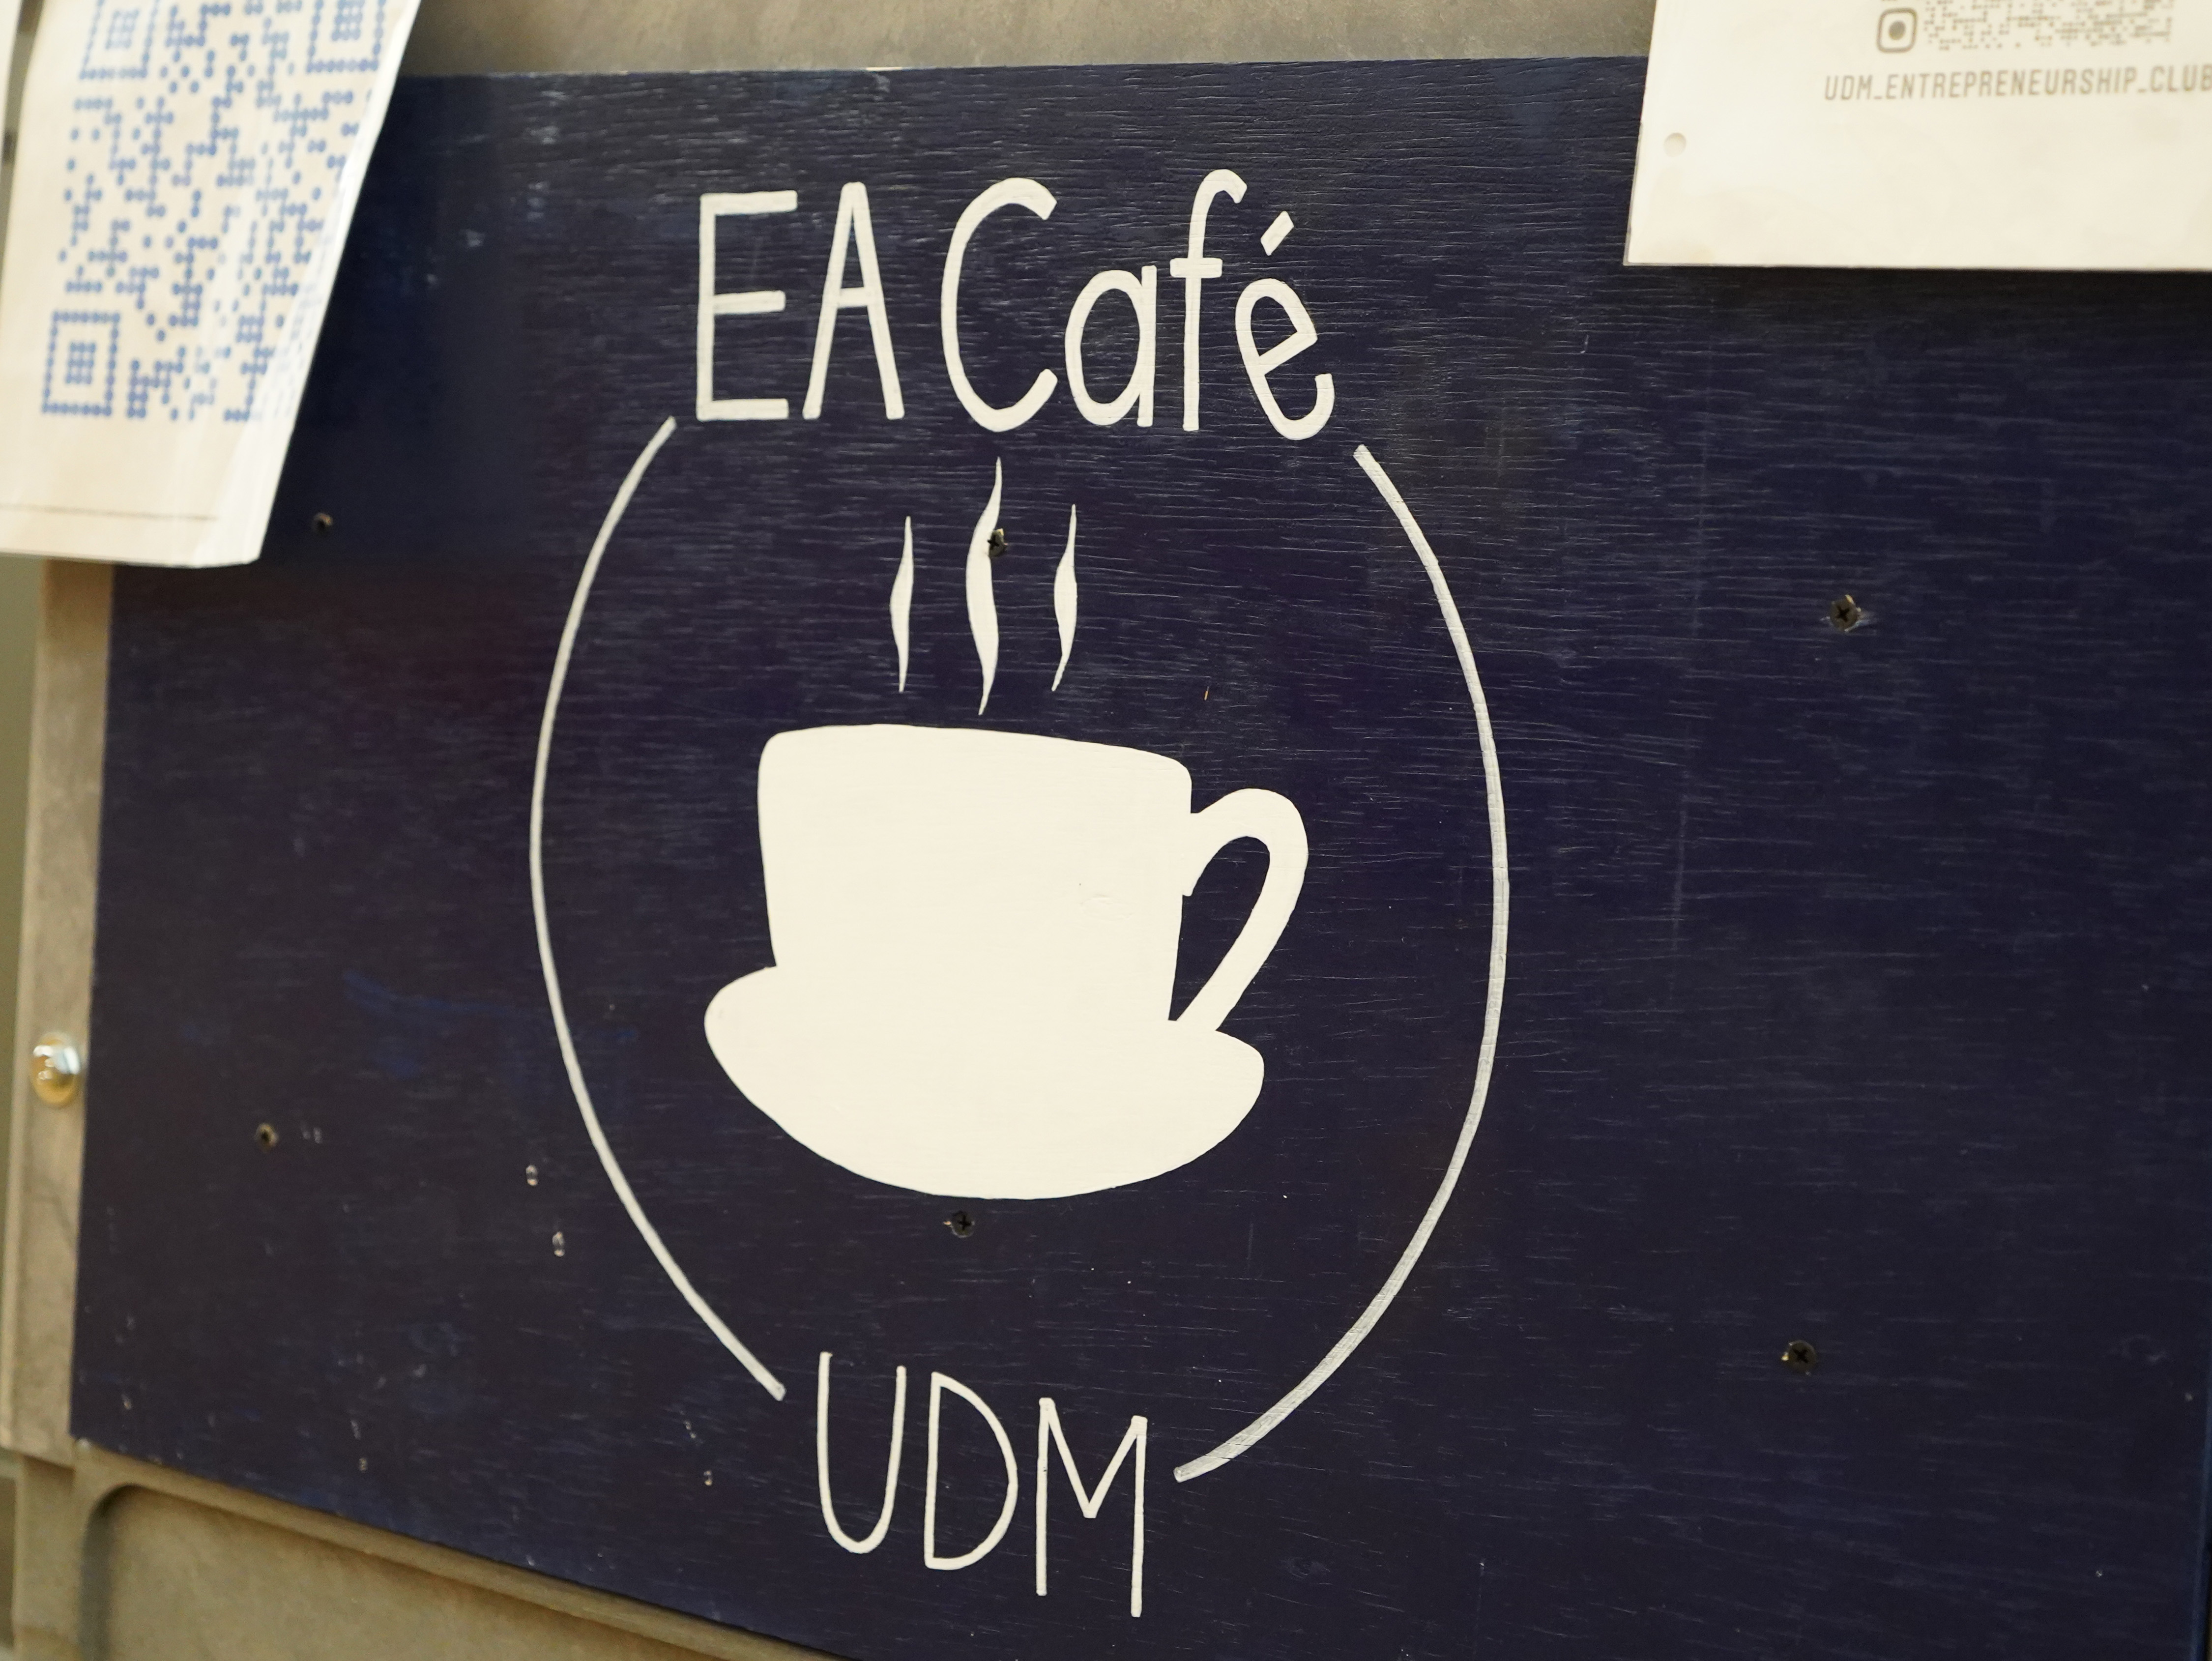 The sign for the EA Cafe at UDM hangs on a coffee cart.